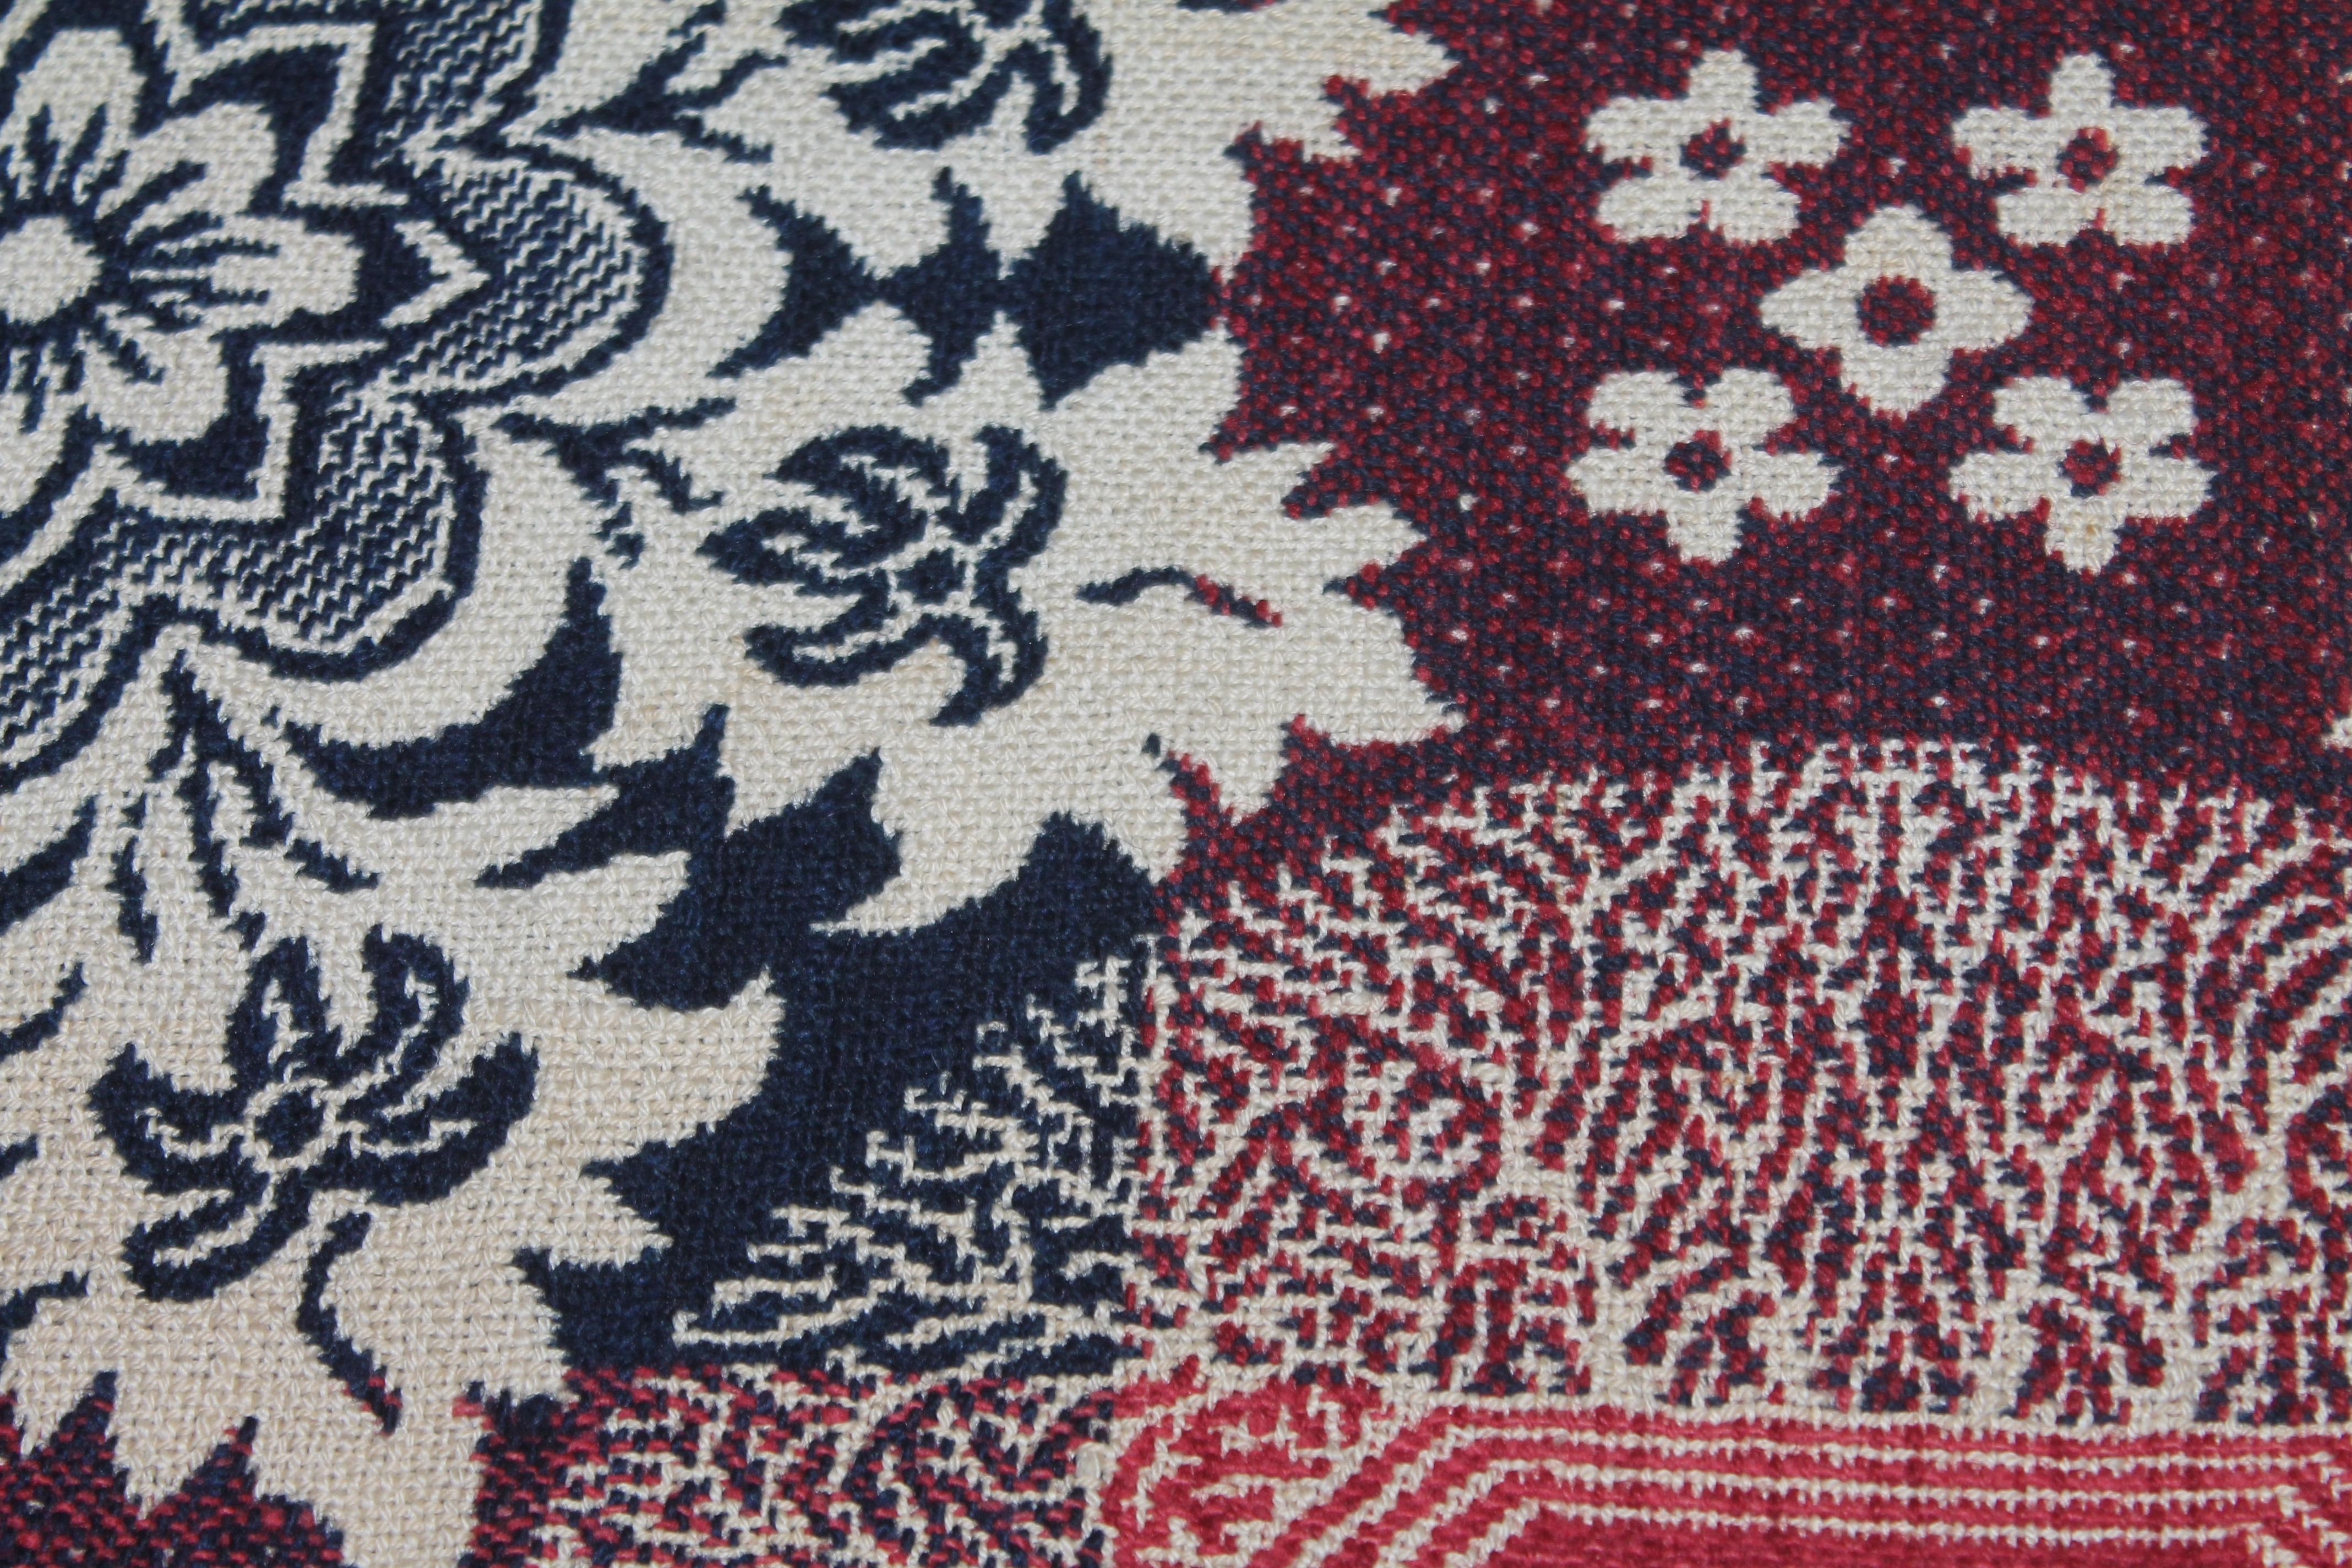 19th Century Jacquard Woven Coverlet with Fringe For Sale 1